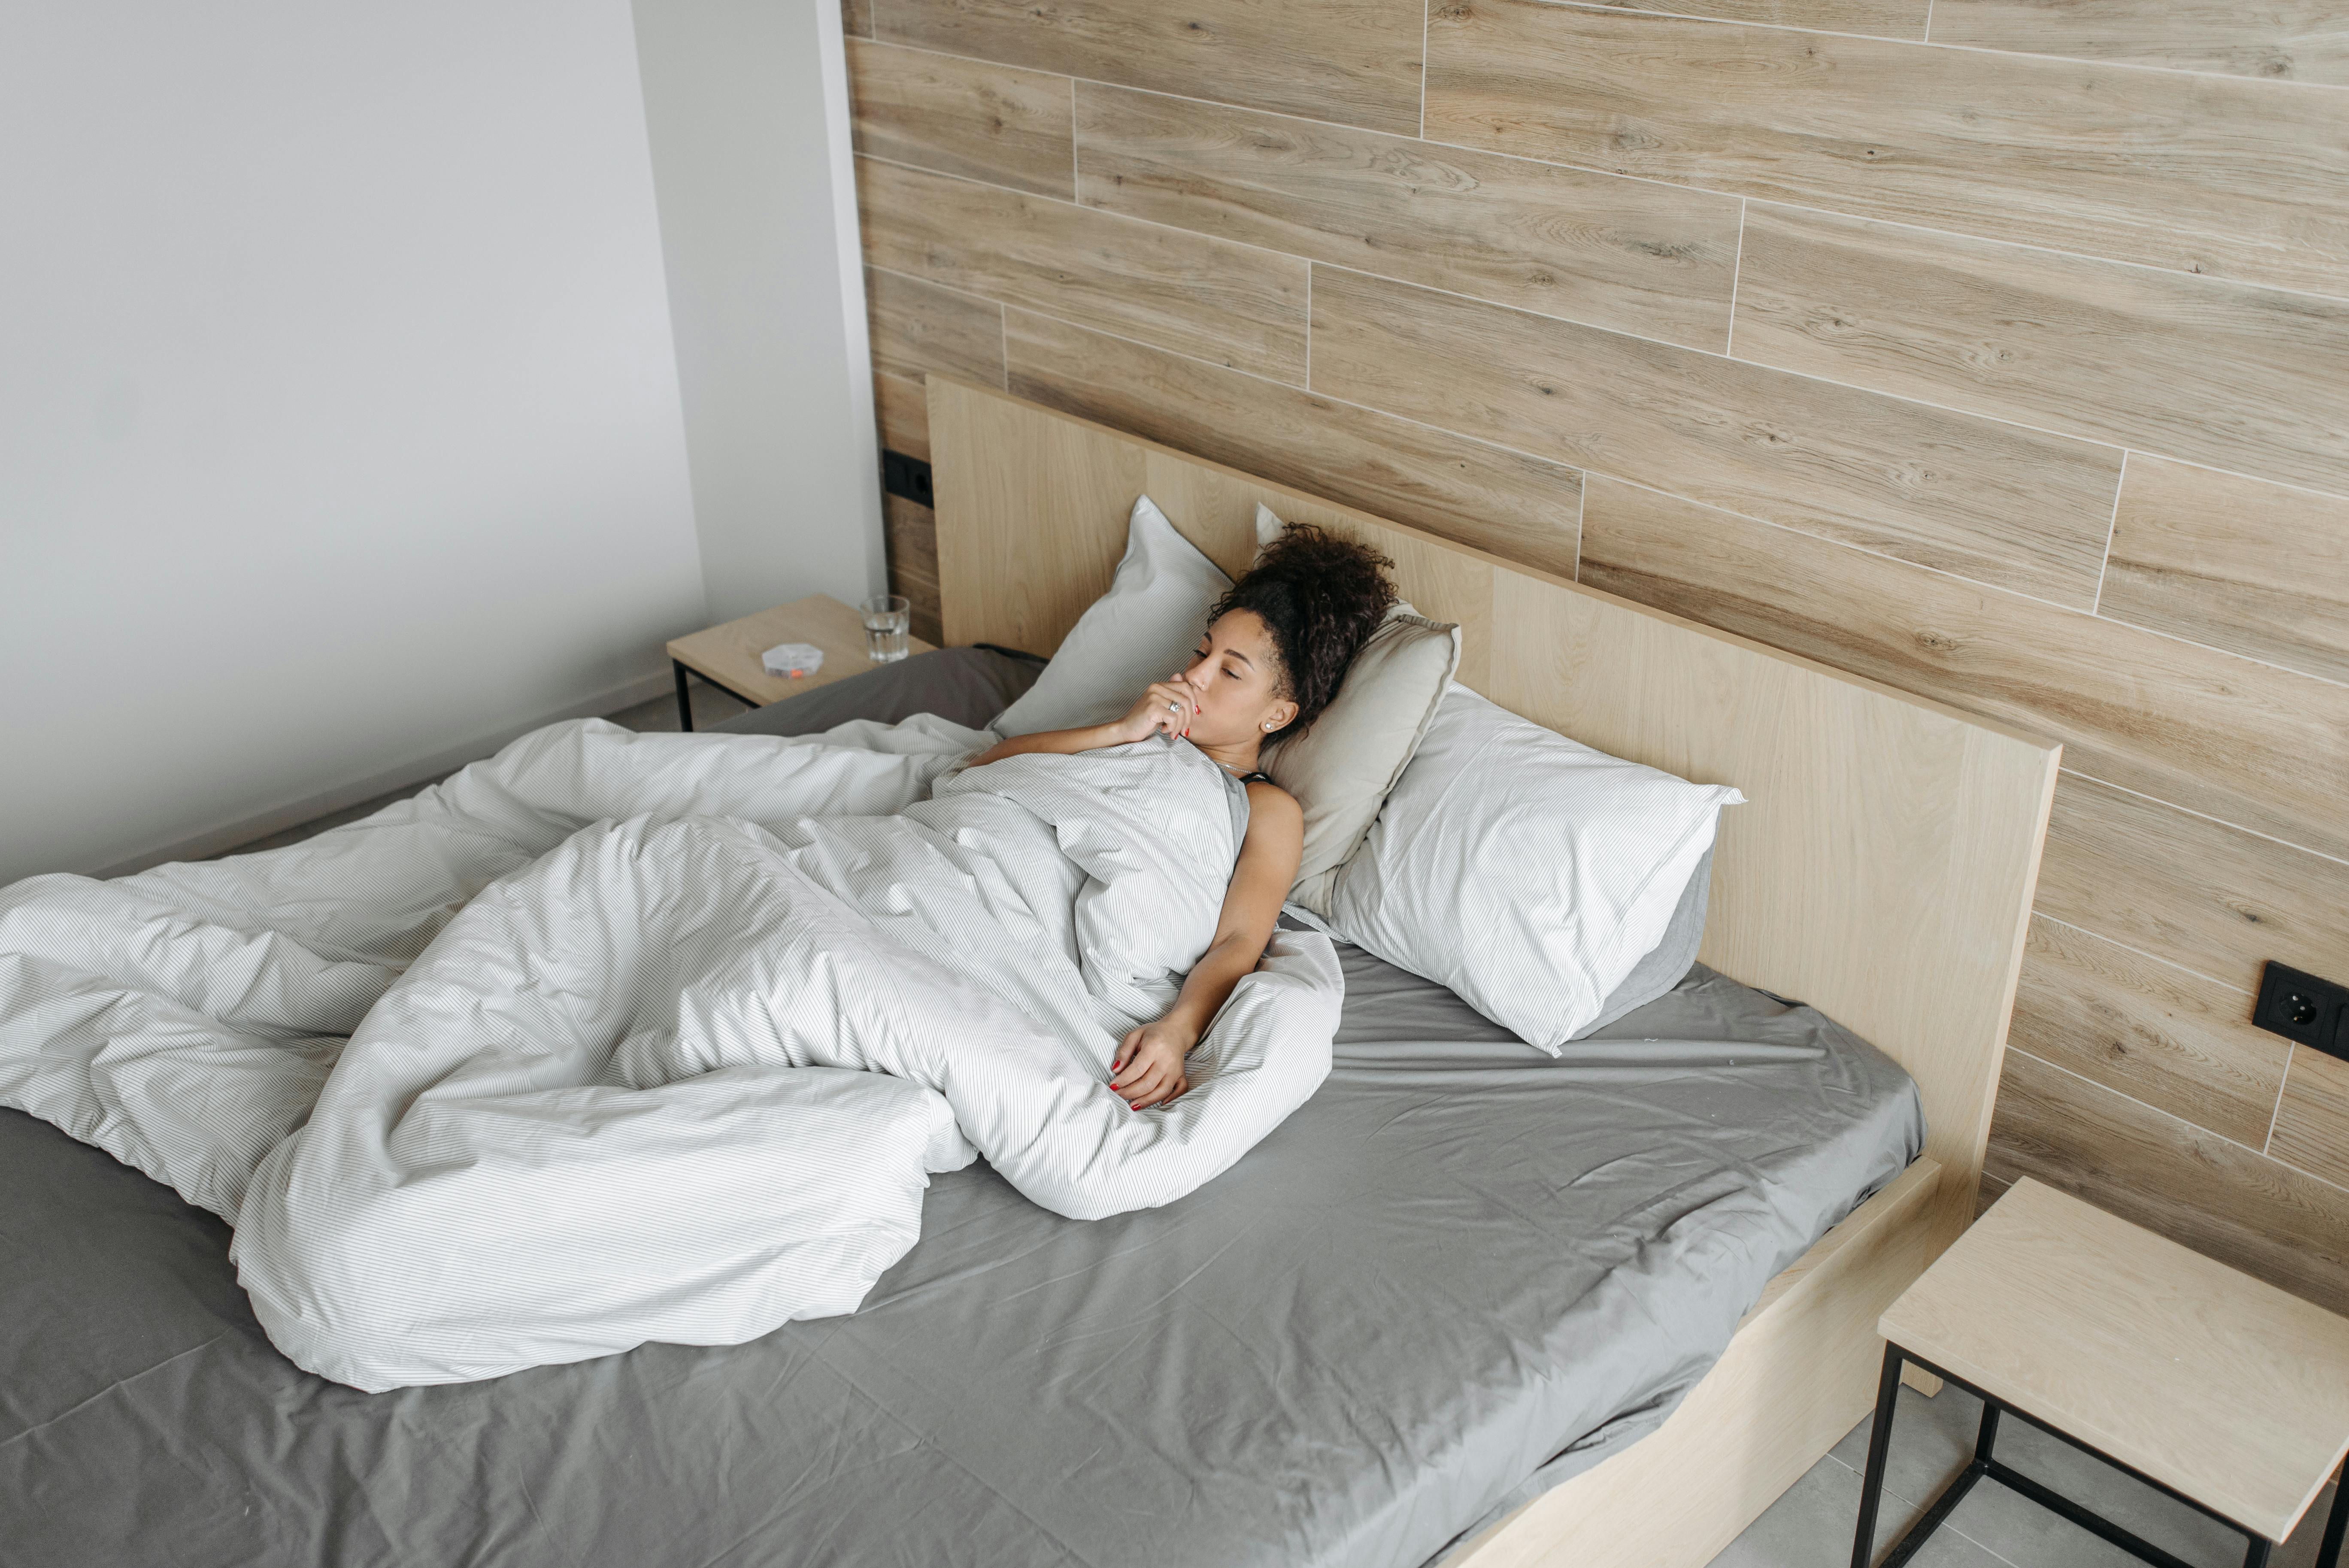 Free Sick Woman On The Bed Stock Photo